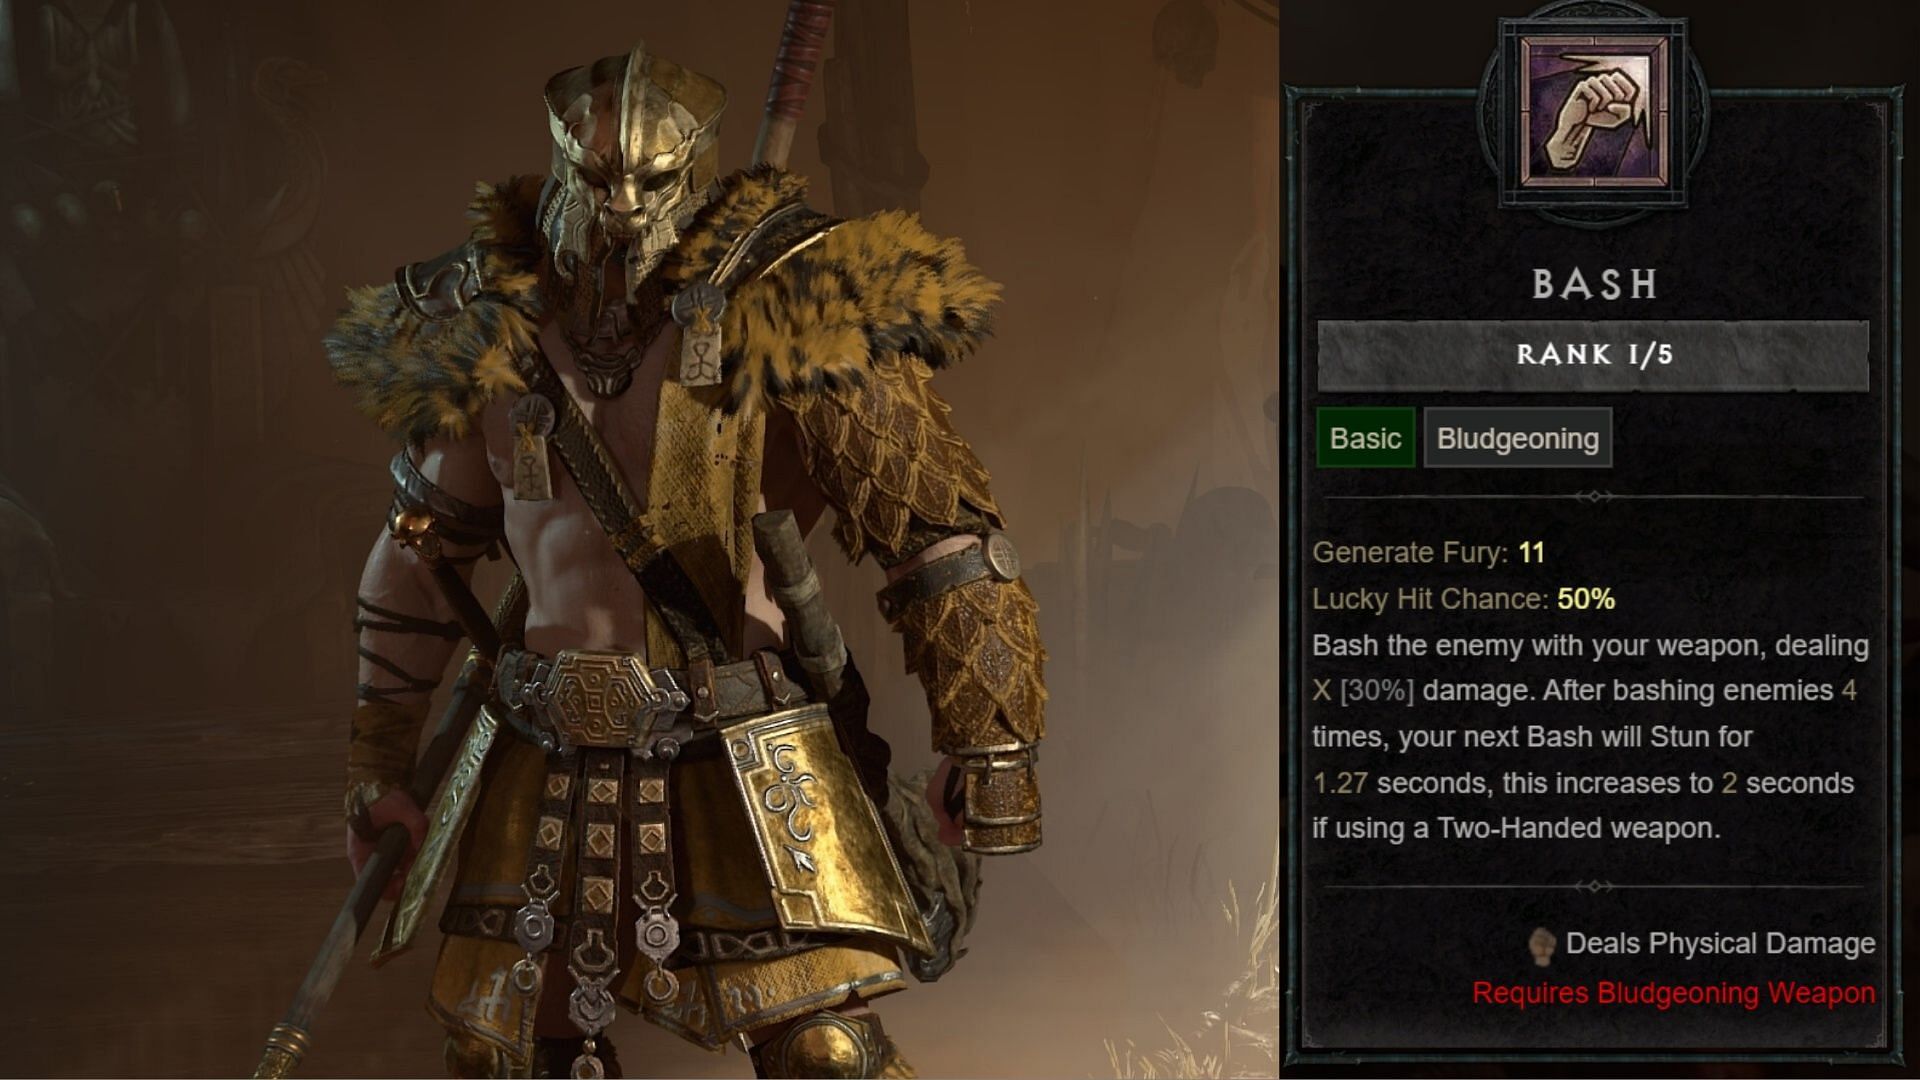 A Barbarian on the left and Bash skill on the right in Diablo 4.